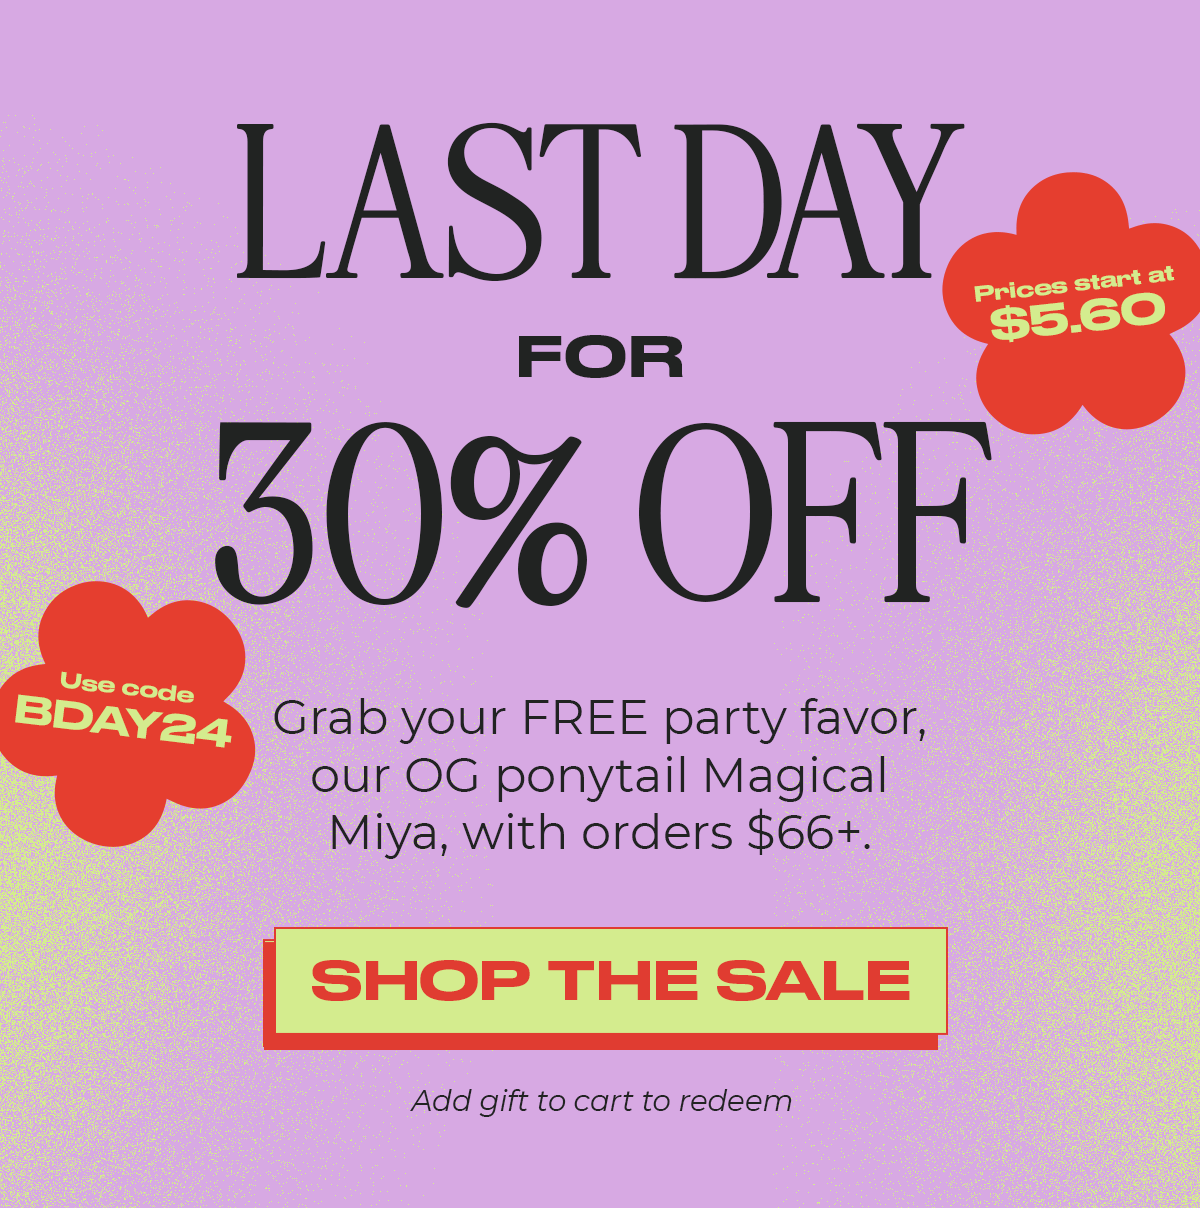 Last Day for 30% off. Grab your FREE party favor, our OG ponytail Magical Miya, with orders \\$66+.